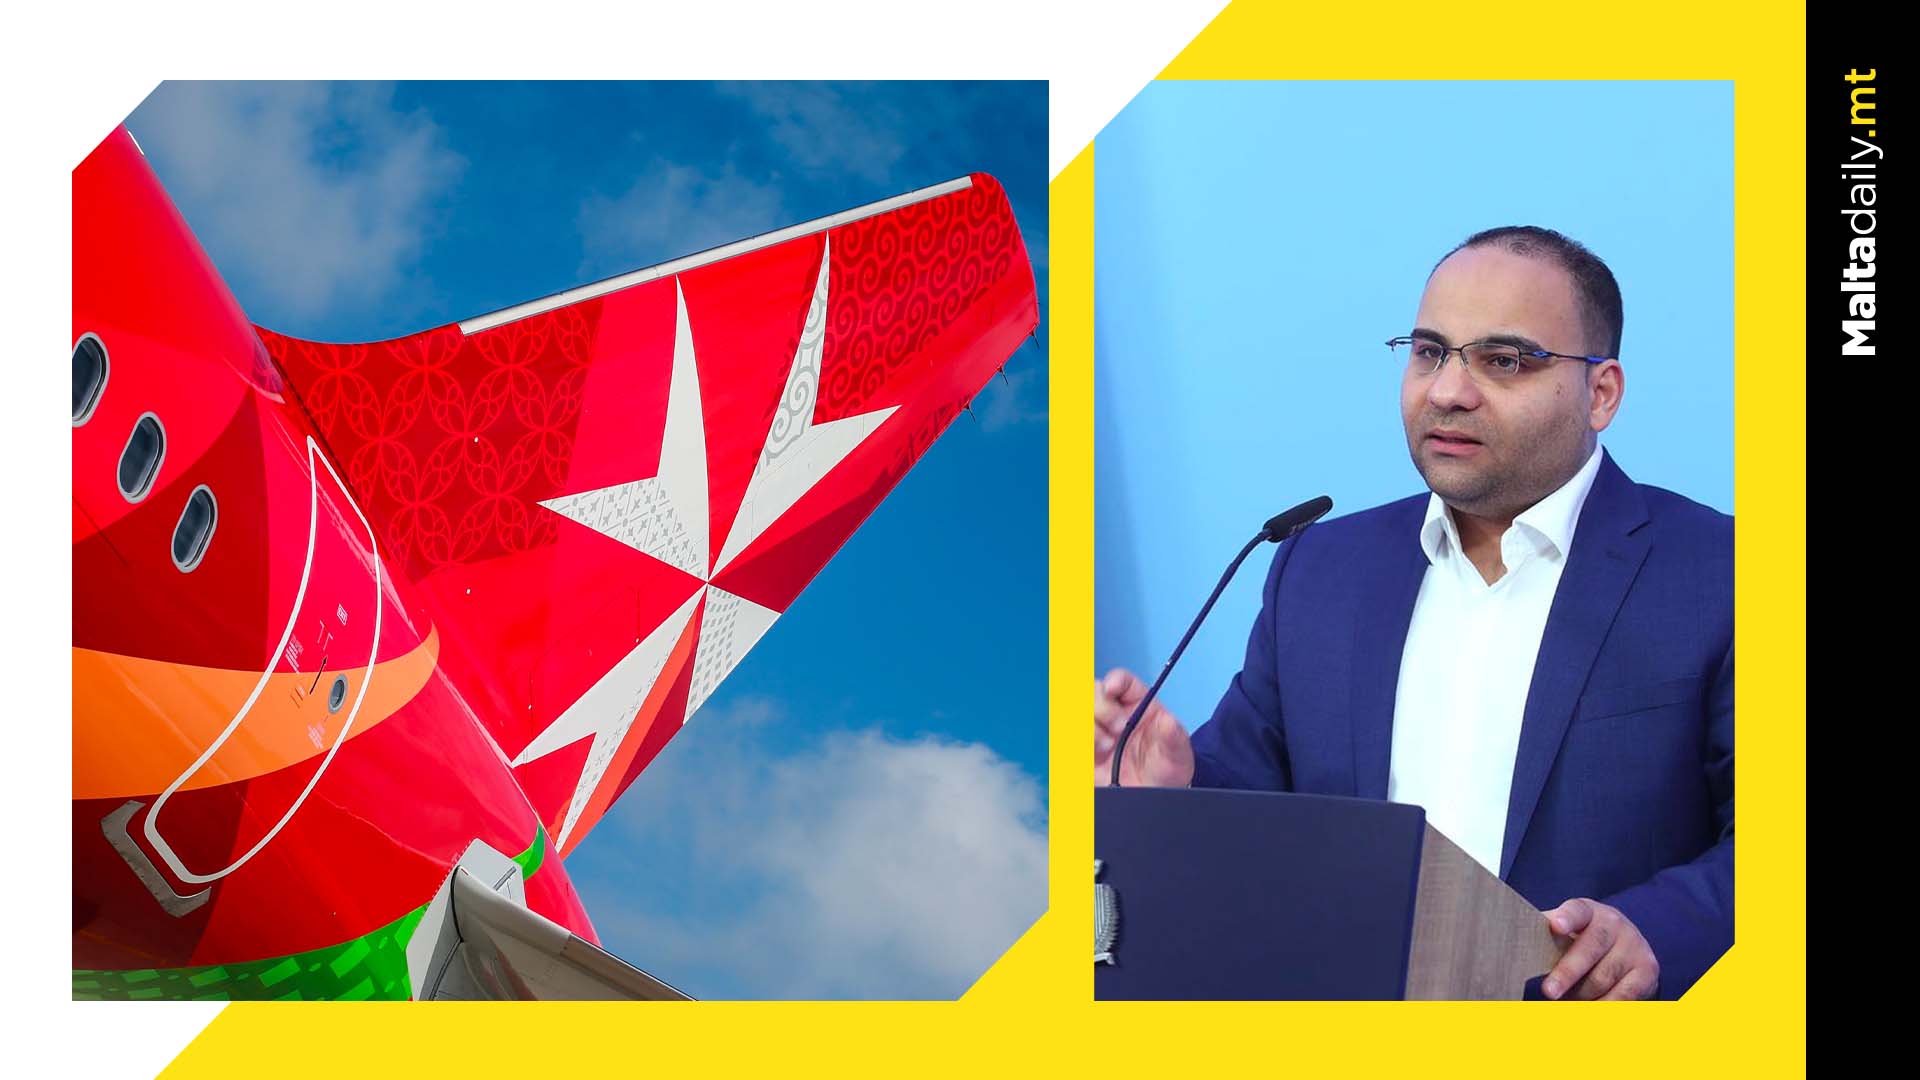 Air Malta will not hire new employees, Finance Minister states